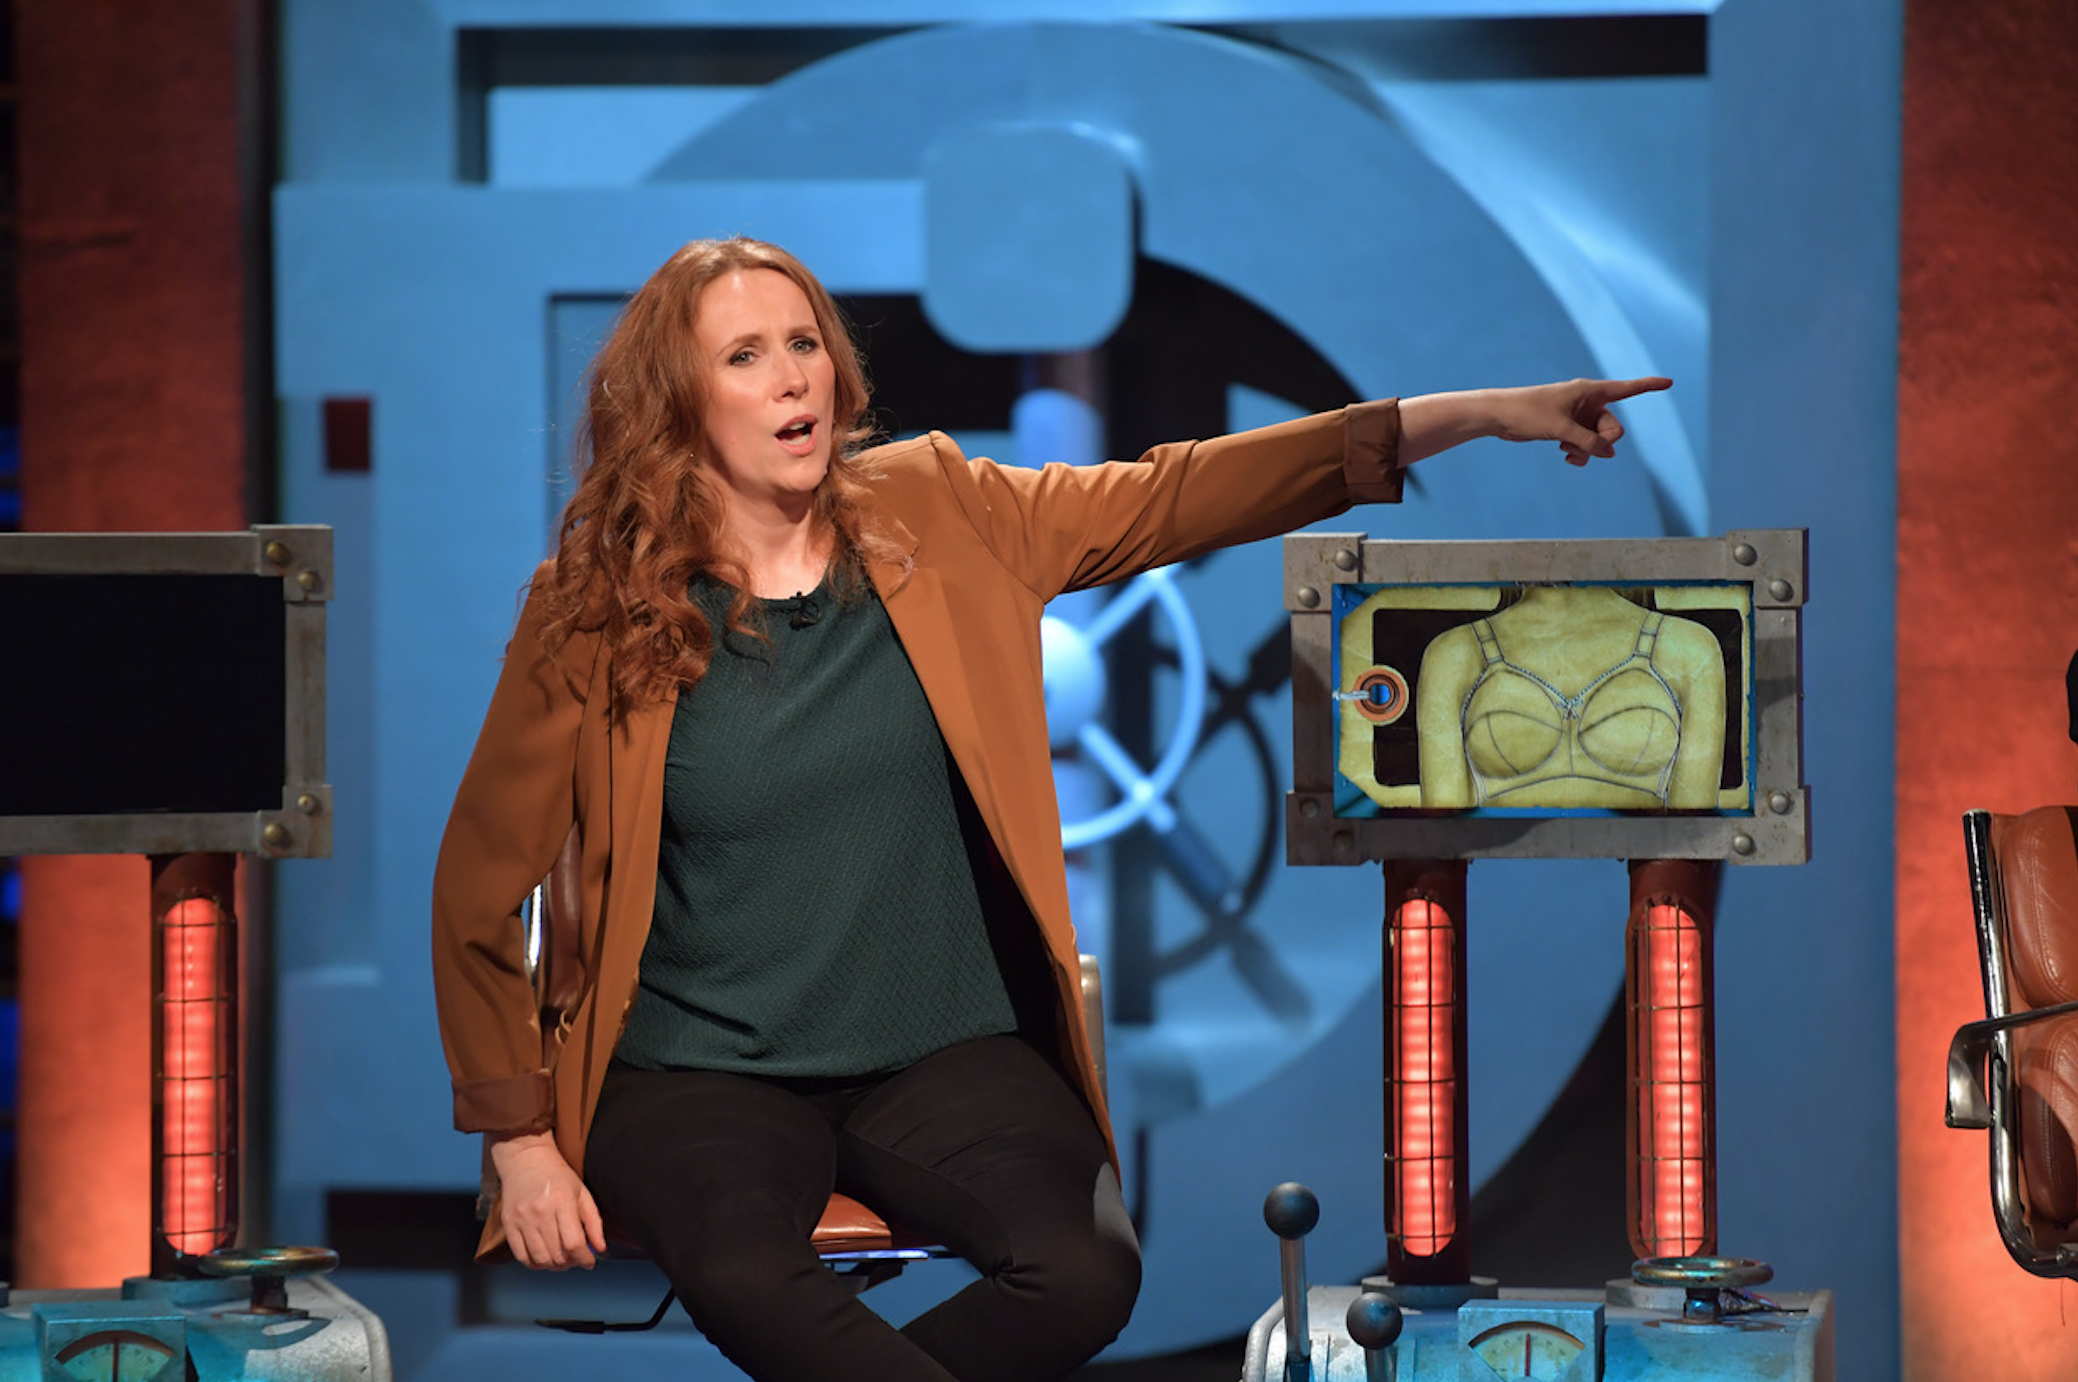 Catherine Tate convinces Frank Skinner to put underwear in Room 101